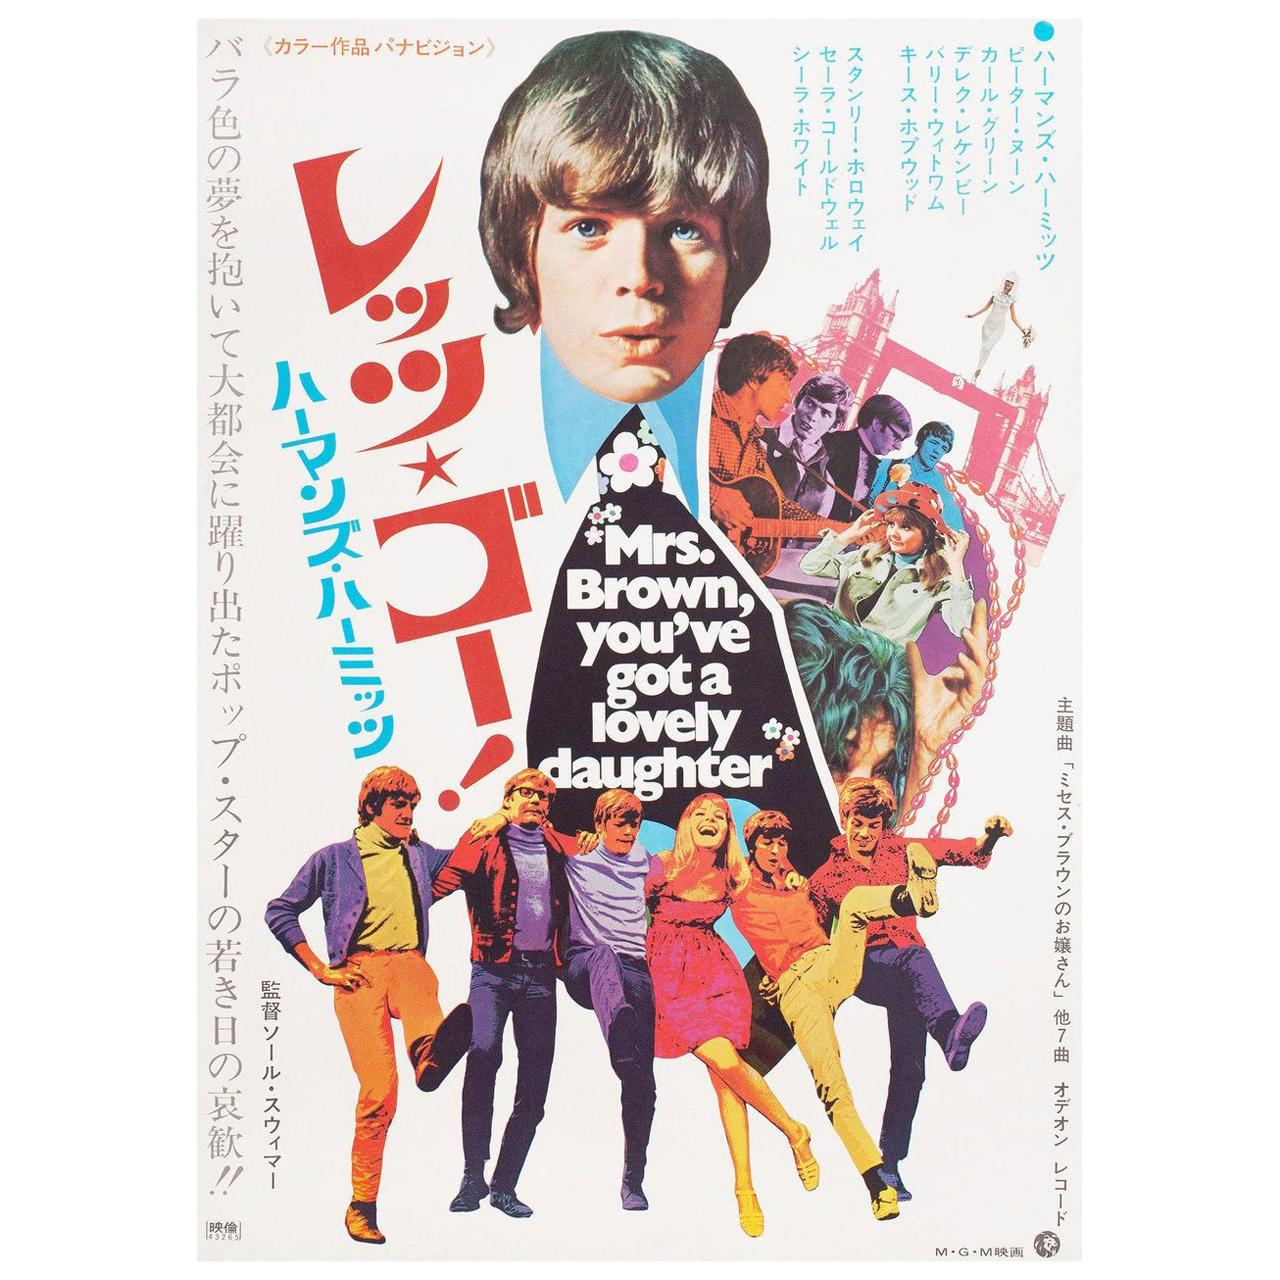 Mrs. Brown, You've Got a Lovely Daughter 1968 Japanese B2 Film Poster